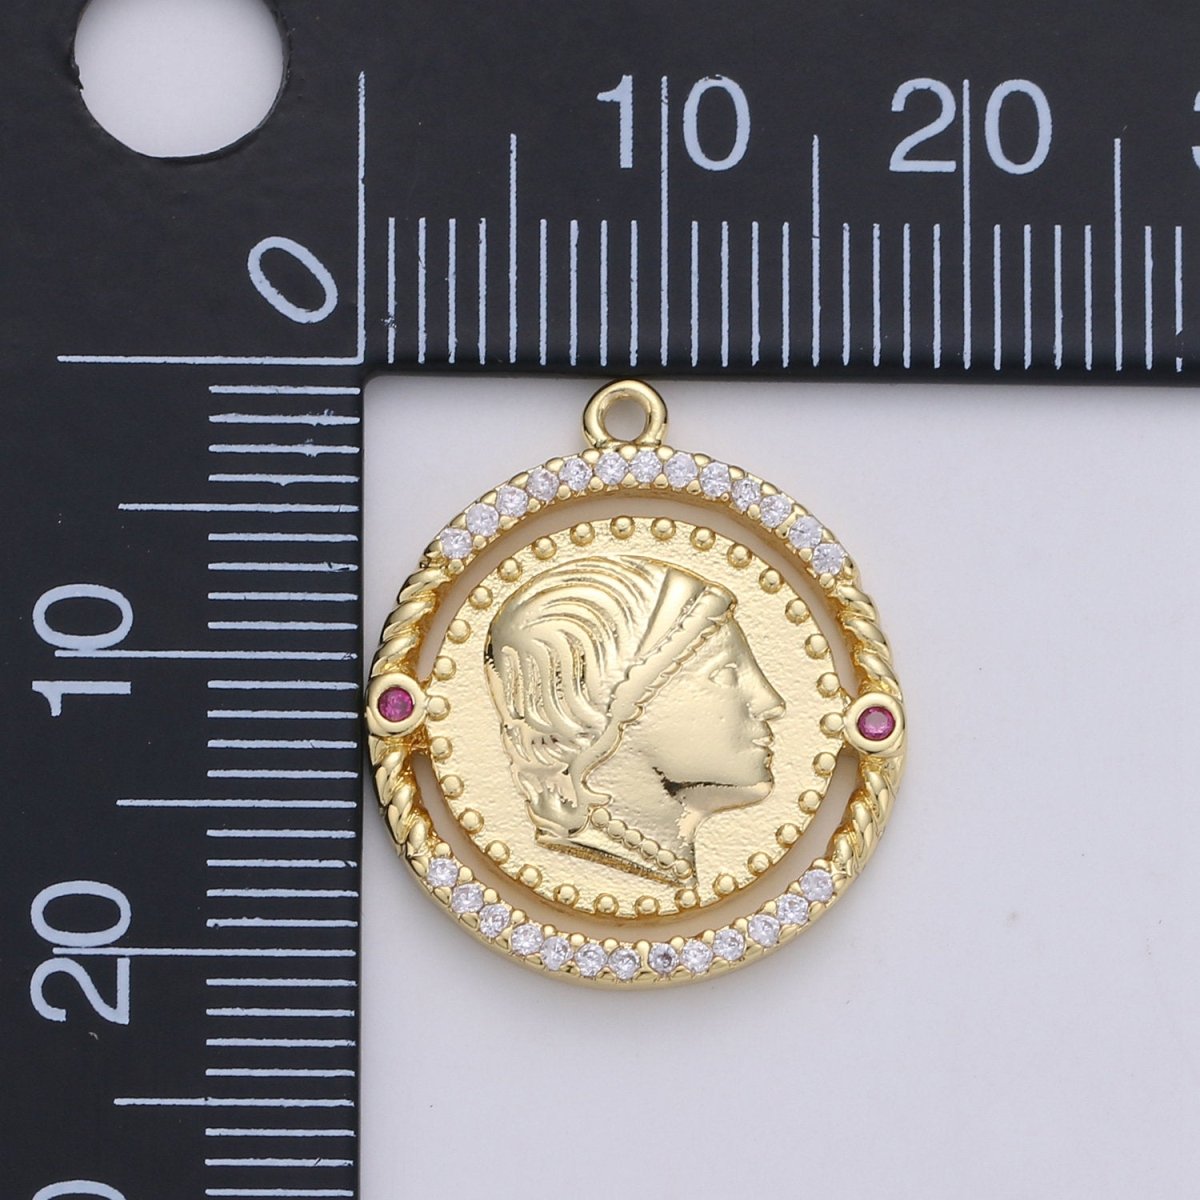 24K Gold Filled Rustic Queen King Ruler Dainty Charm with Black or Pink Micro Pave Cubic Zirconia CZ Stone for Necklace or Bracelet, C-910 ,C-931 - DLUXCA